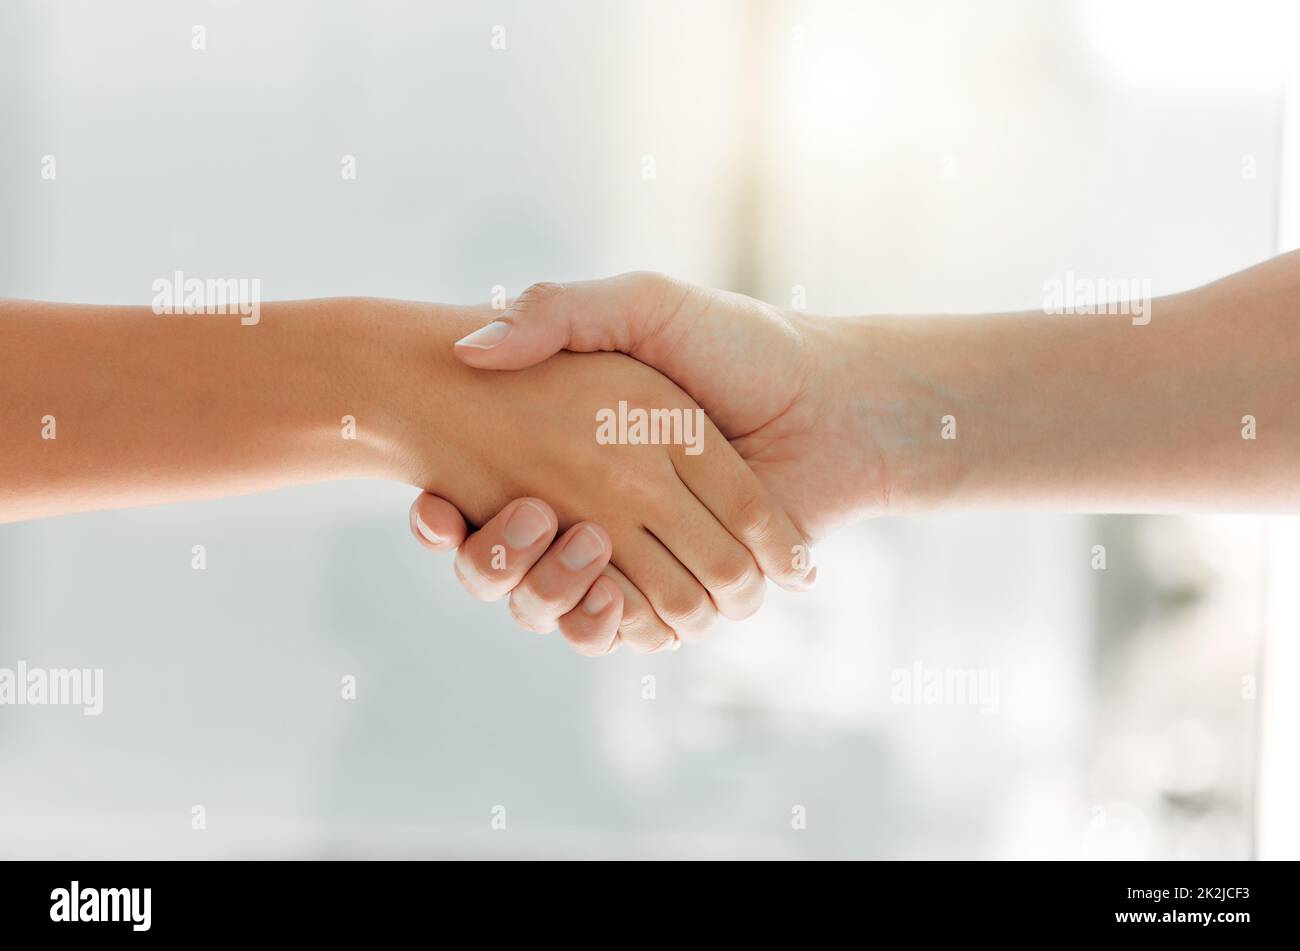 You got a deal. Shot of two unrecognizable people shaking hands at home. Stock Photo